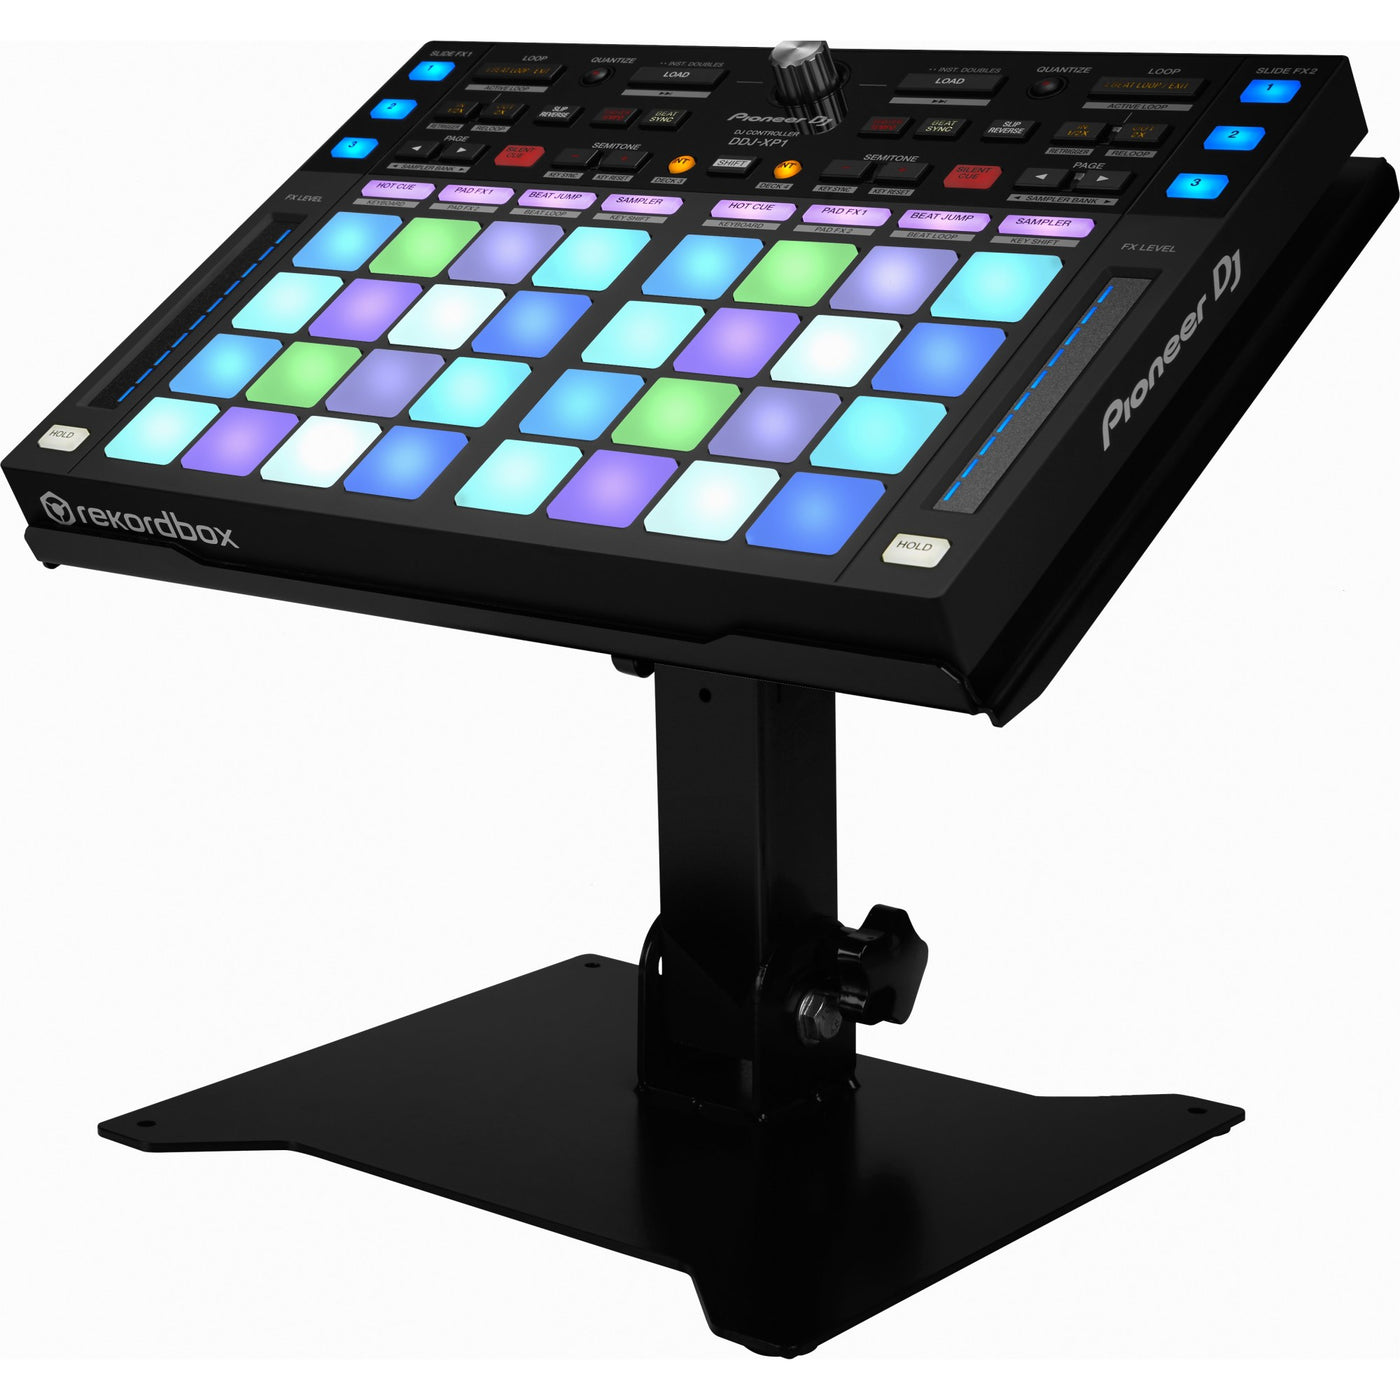 Pioneer DJ DJC-STS1 Stand for DJ Booth, Professional DJ Equipment Portable Table, For Recording & Performance